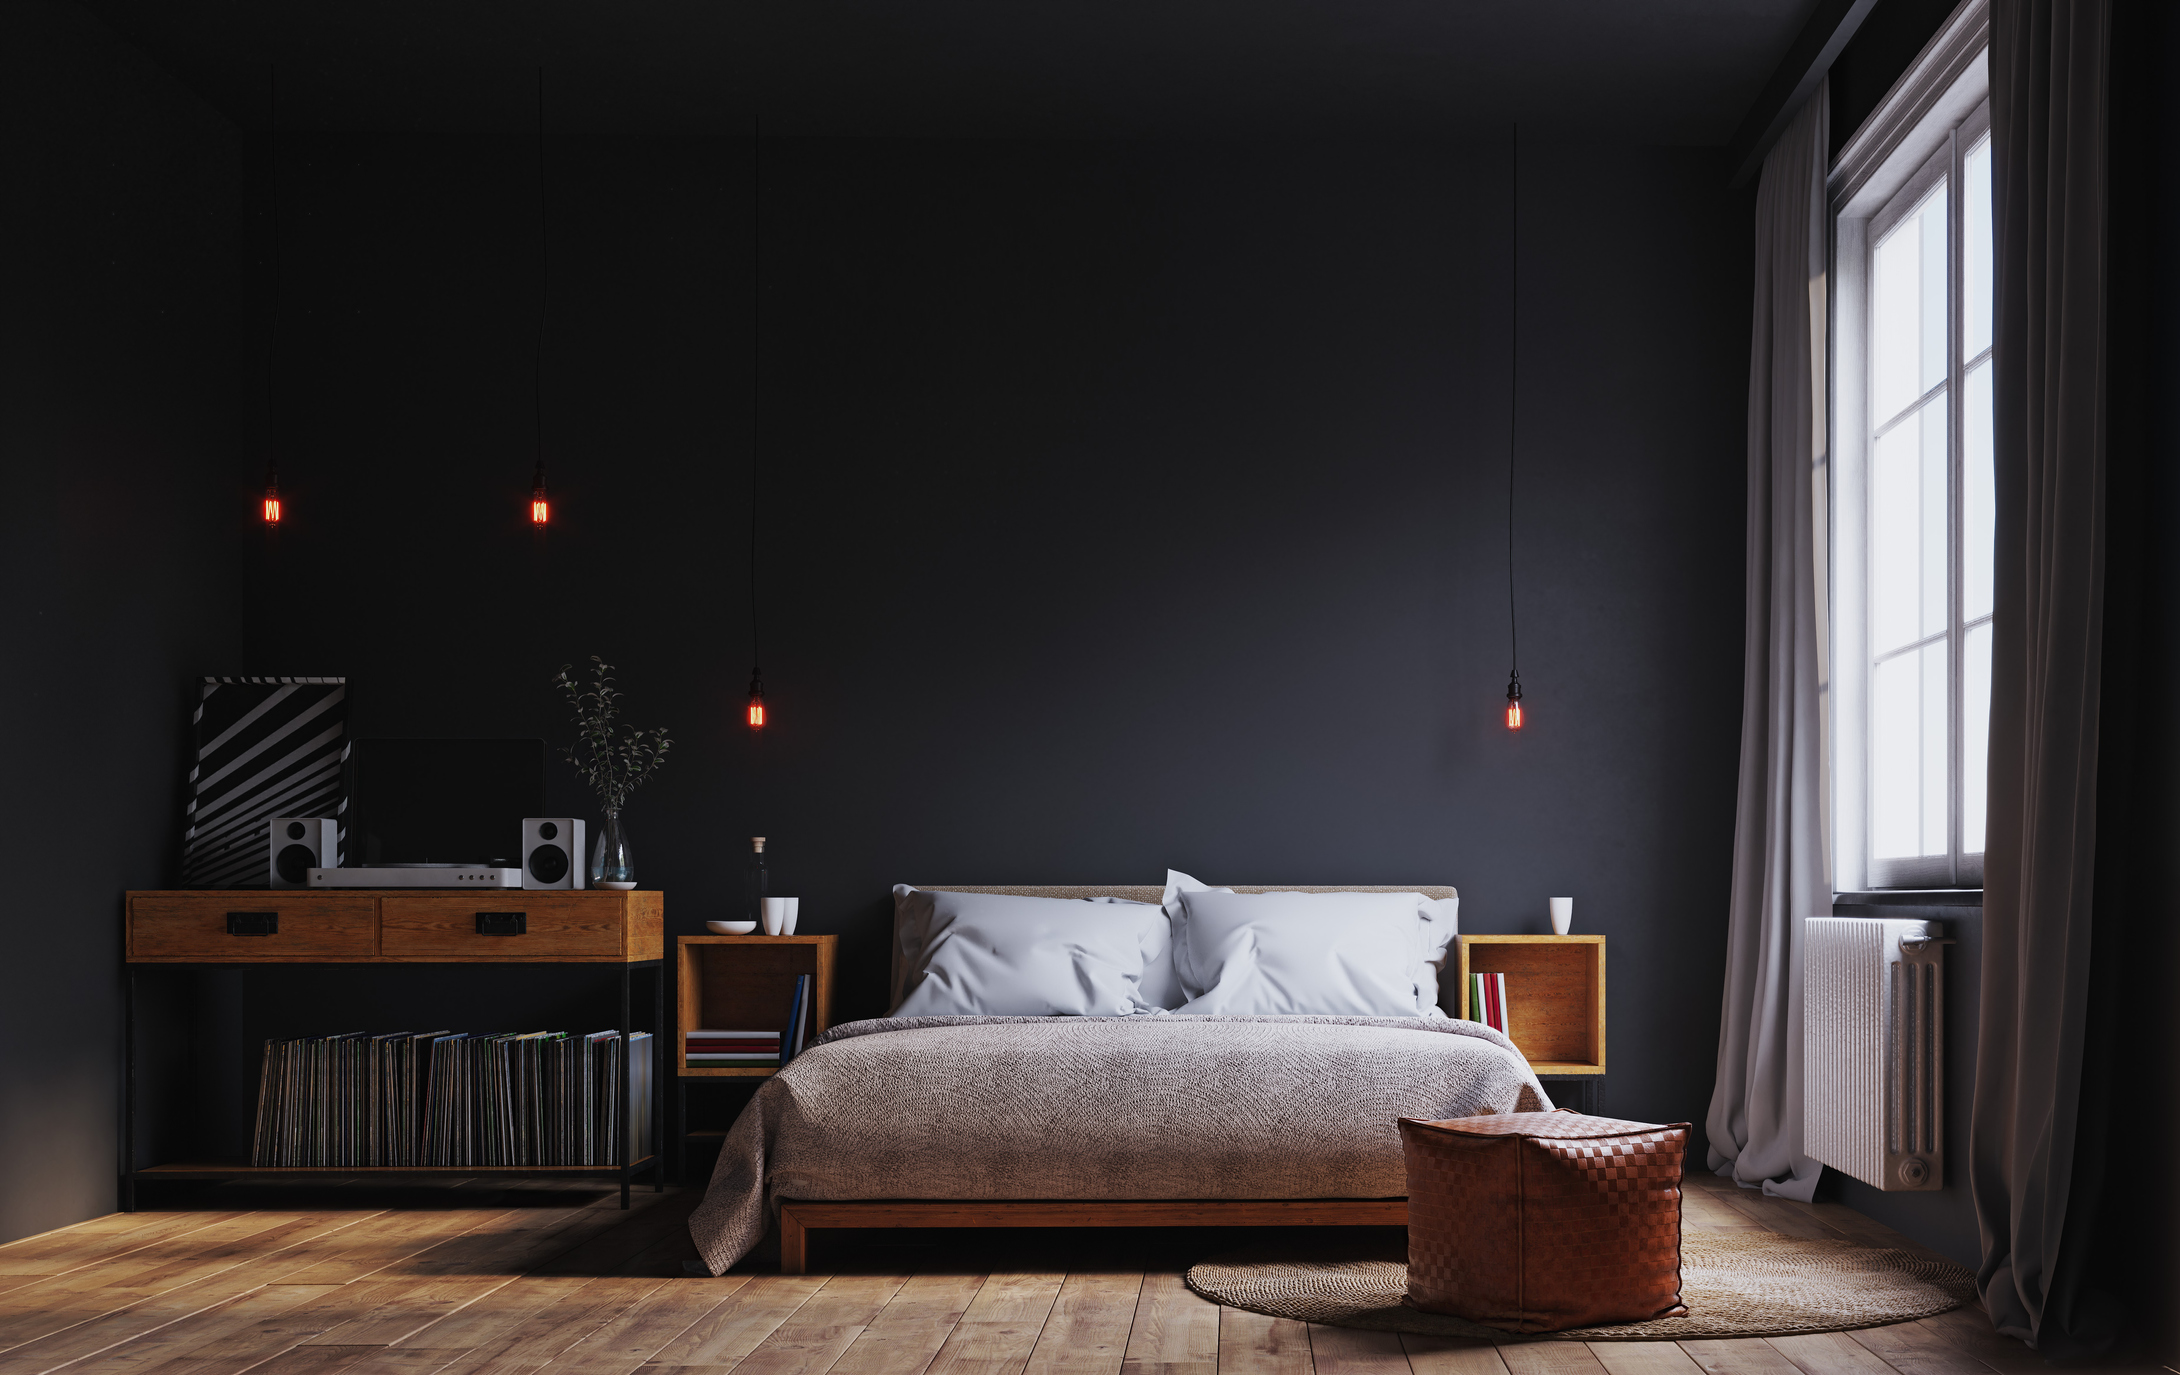 Minimalist bedroom with white linens on bed and matching, dark grey ceilings and walls.